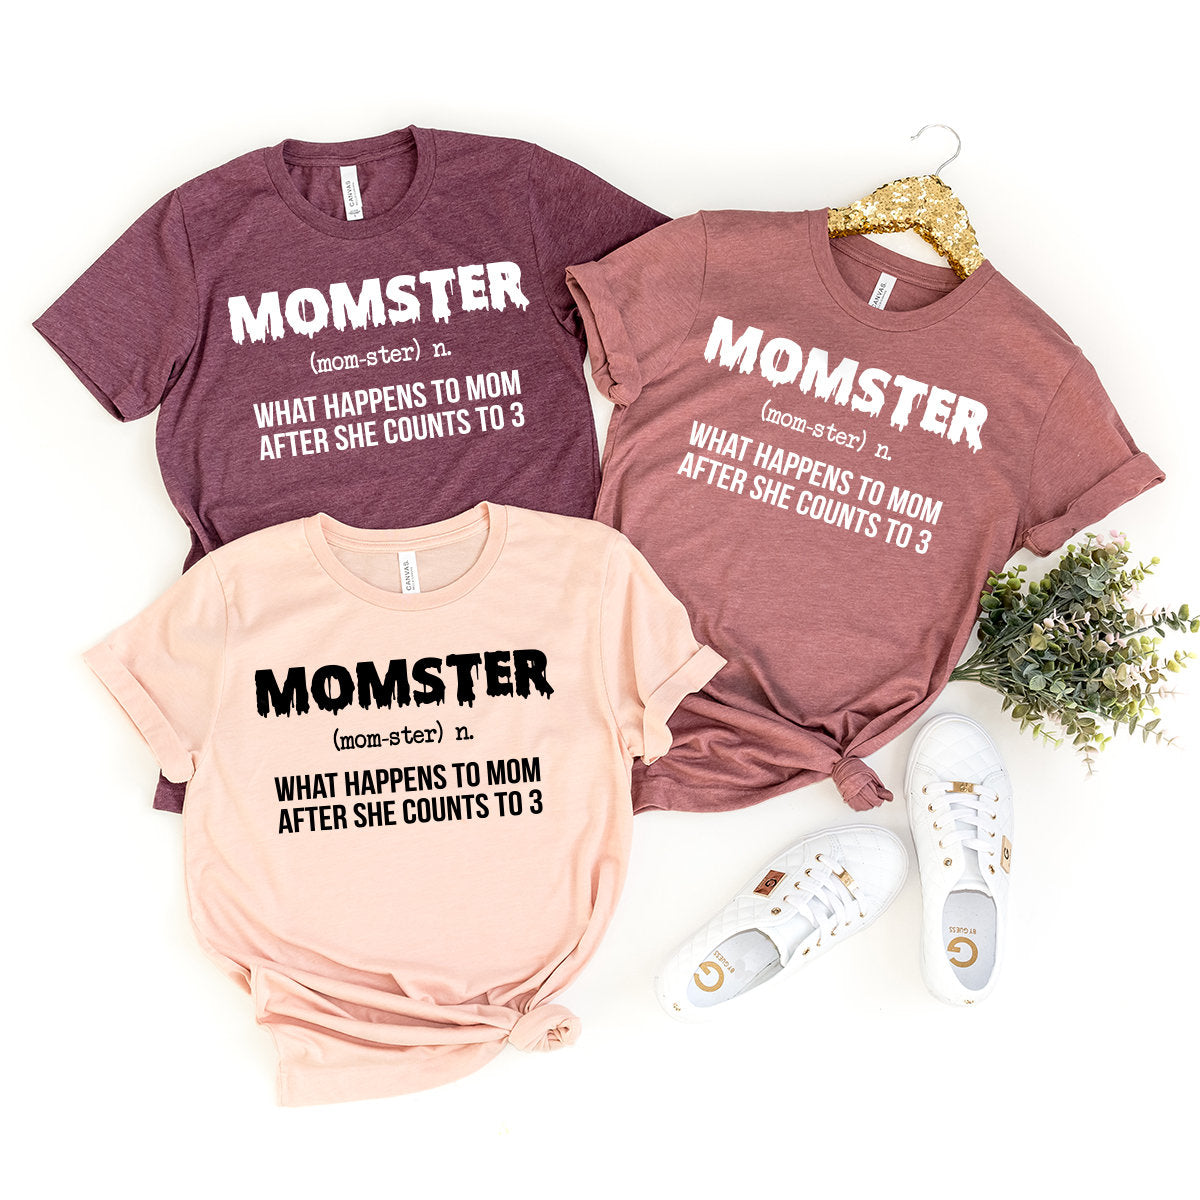 Momster Shirt, Halloween Mom Shirt, What Happens To Mom After She Counts To 3 Shirt, Momster Definition Tee, Mom-Ster Shirt, Mom Life Shirt - Fastdeliverytees.com